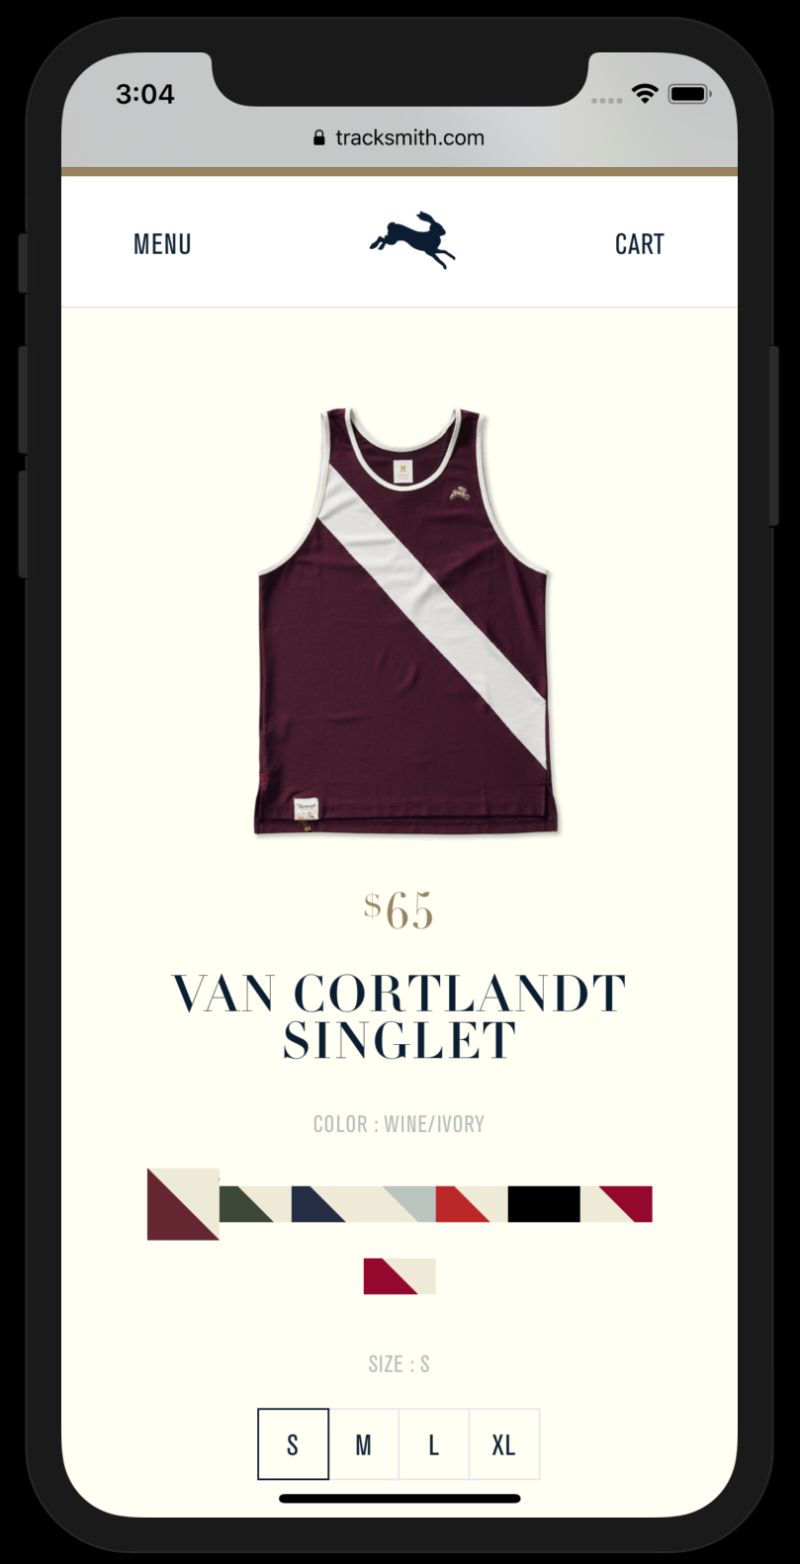 mobile device tracksmith-mobile-2.png